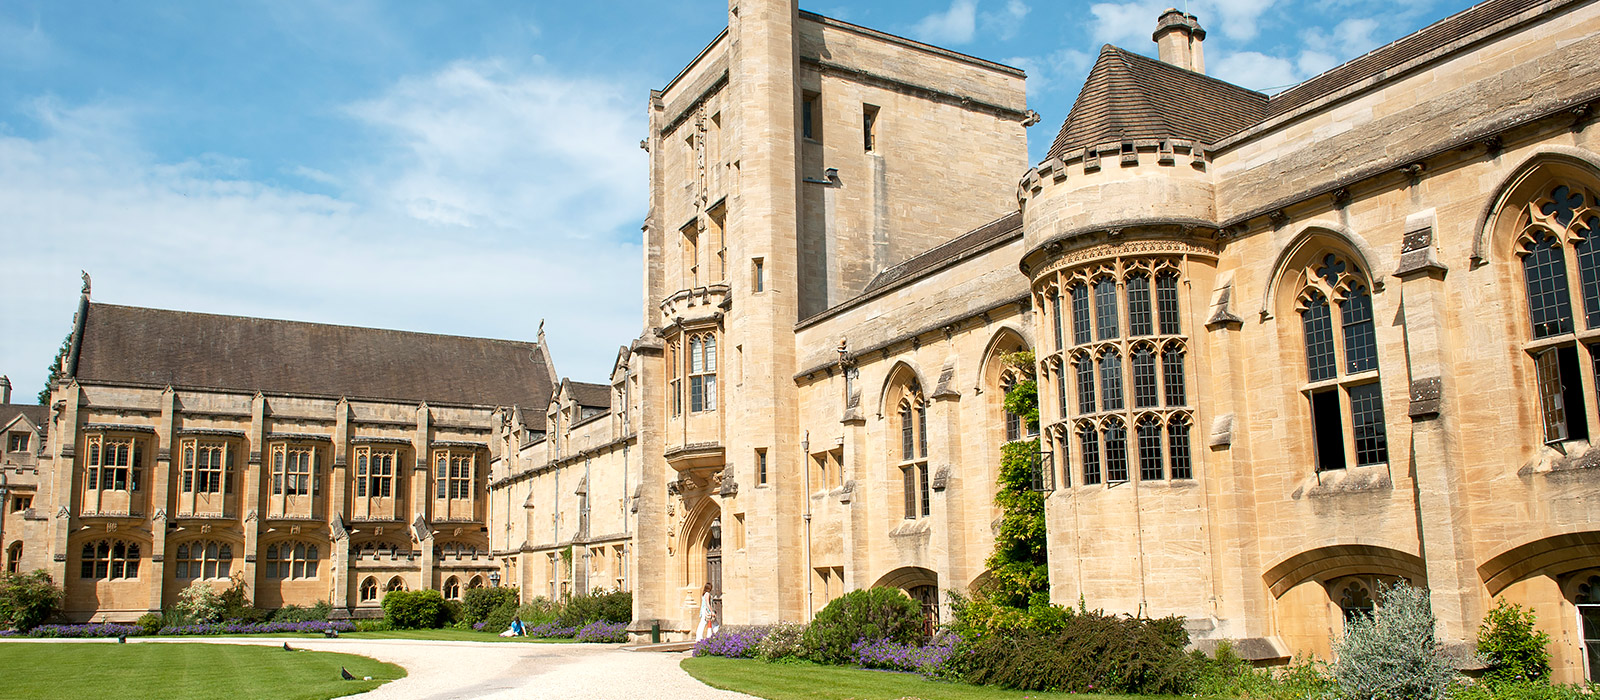 The exterior and part of the grounds of Mansfield College